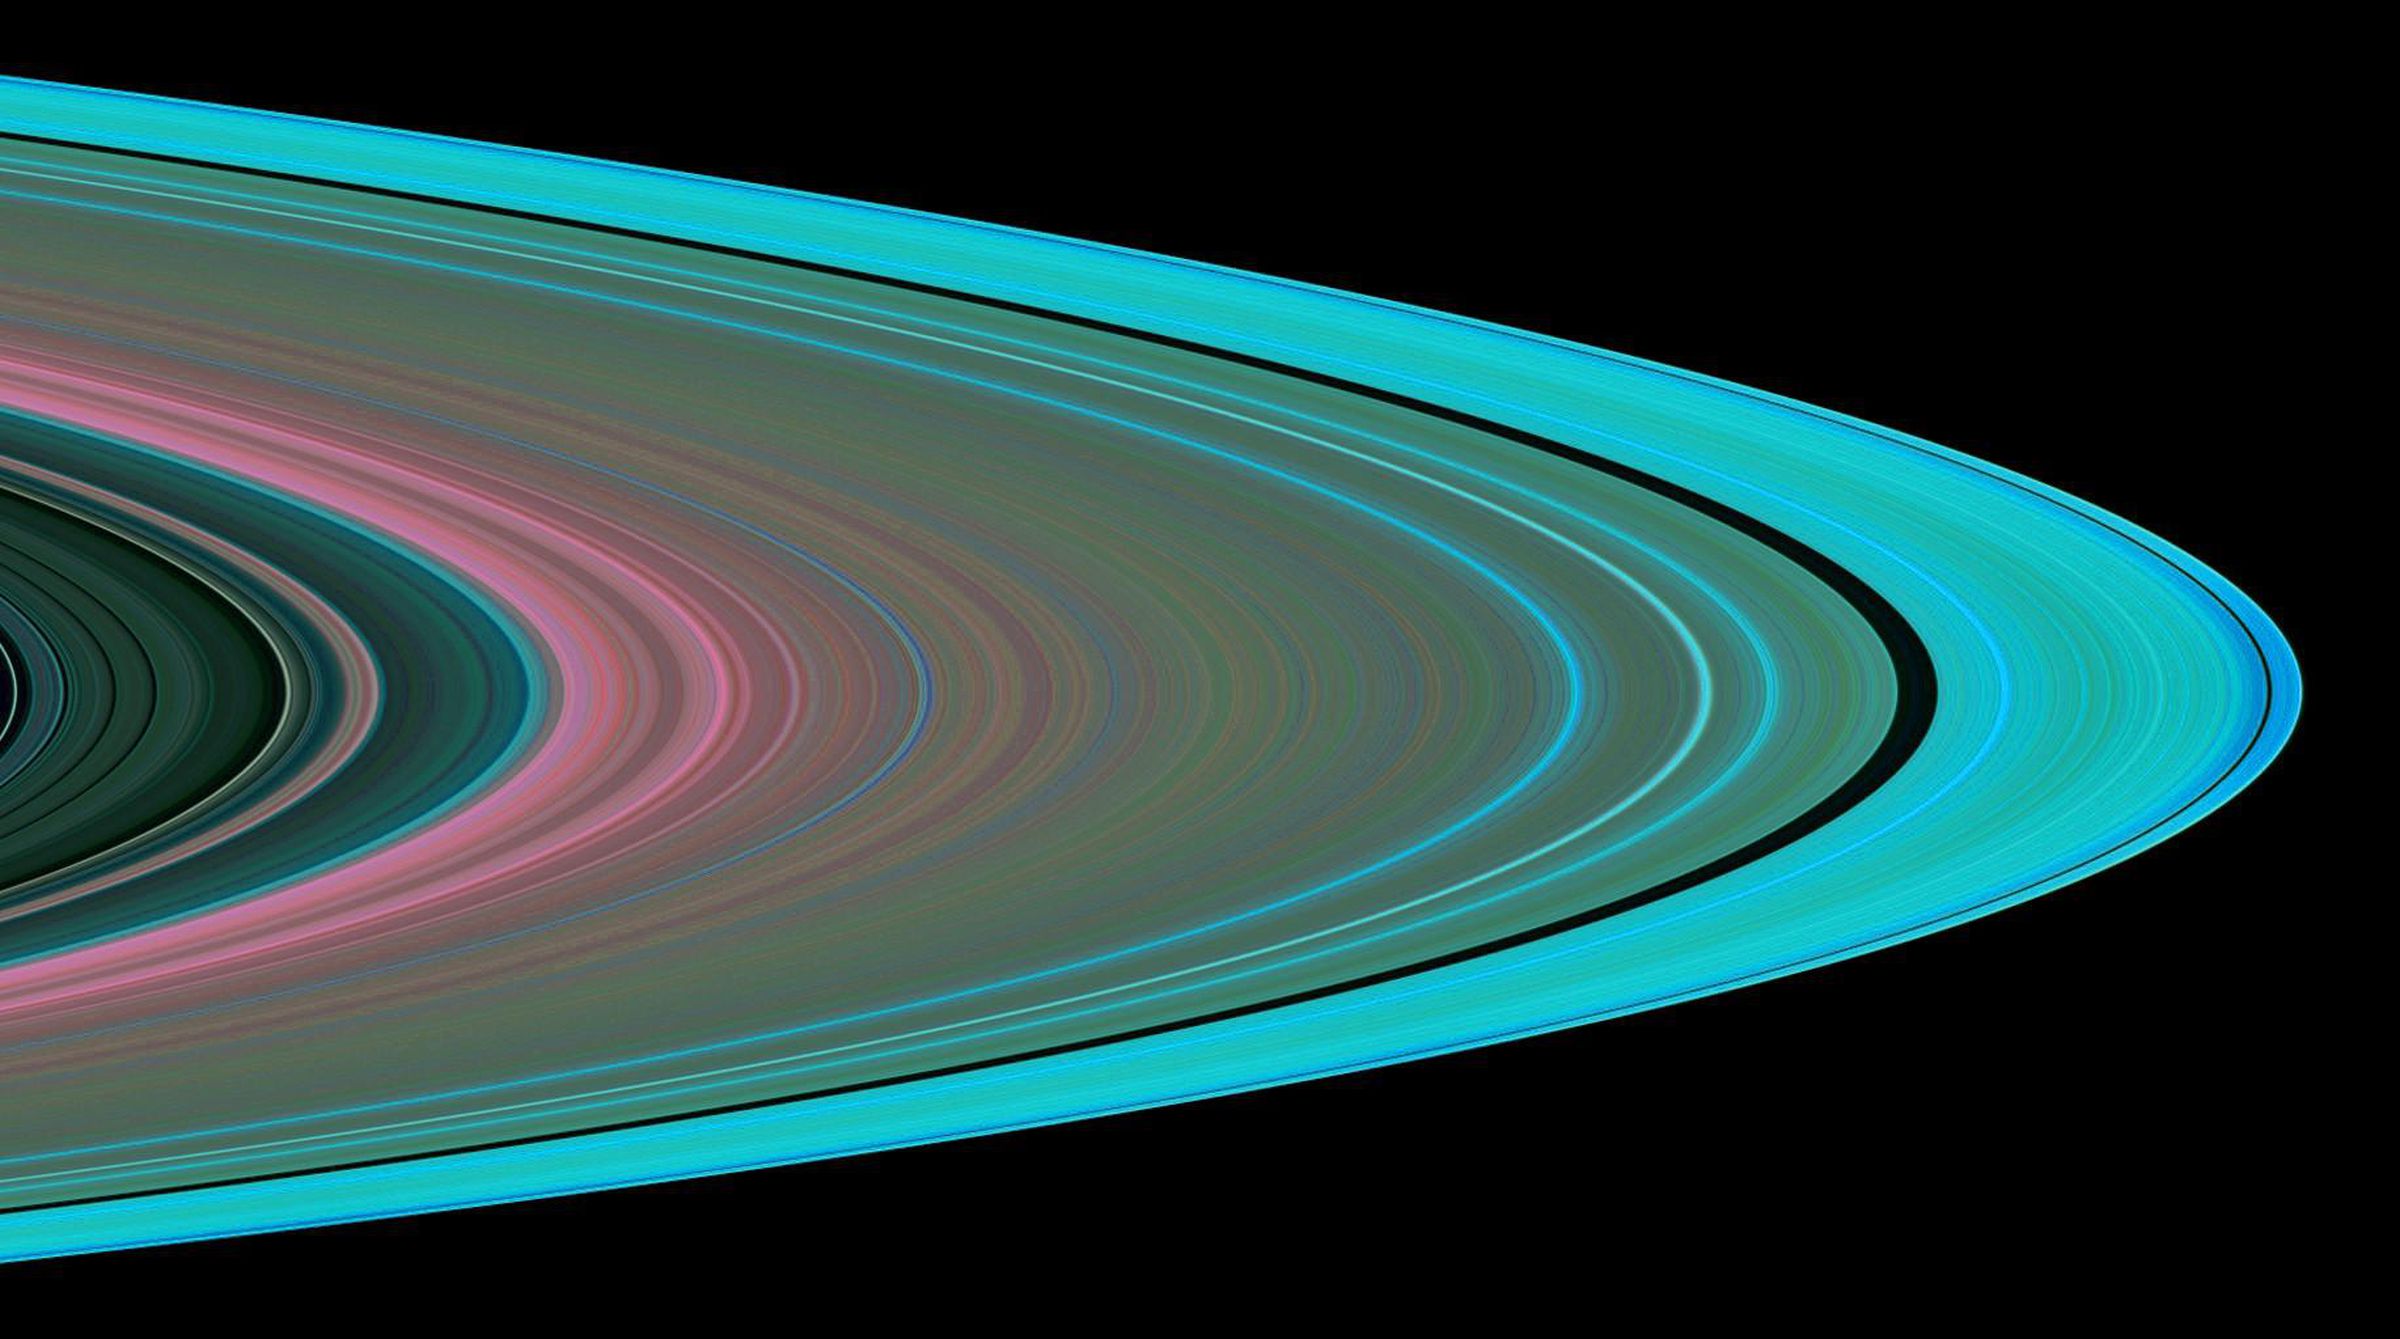 A colored image of Saturn’s rings, as seen from Cassini.